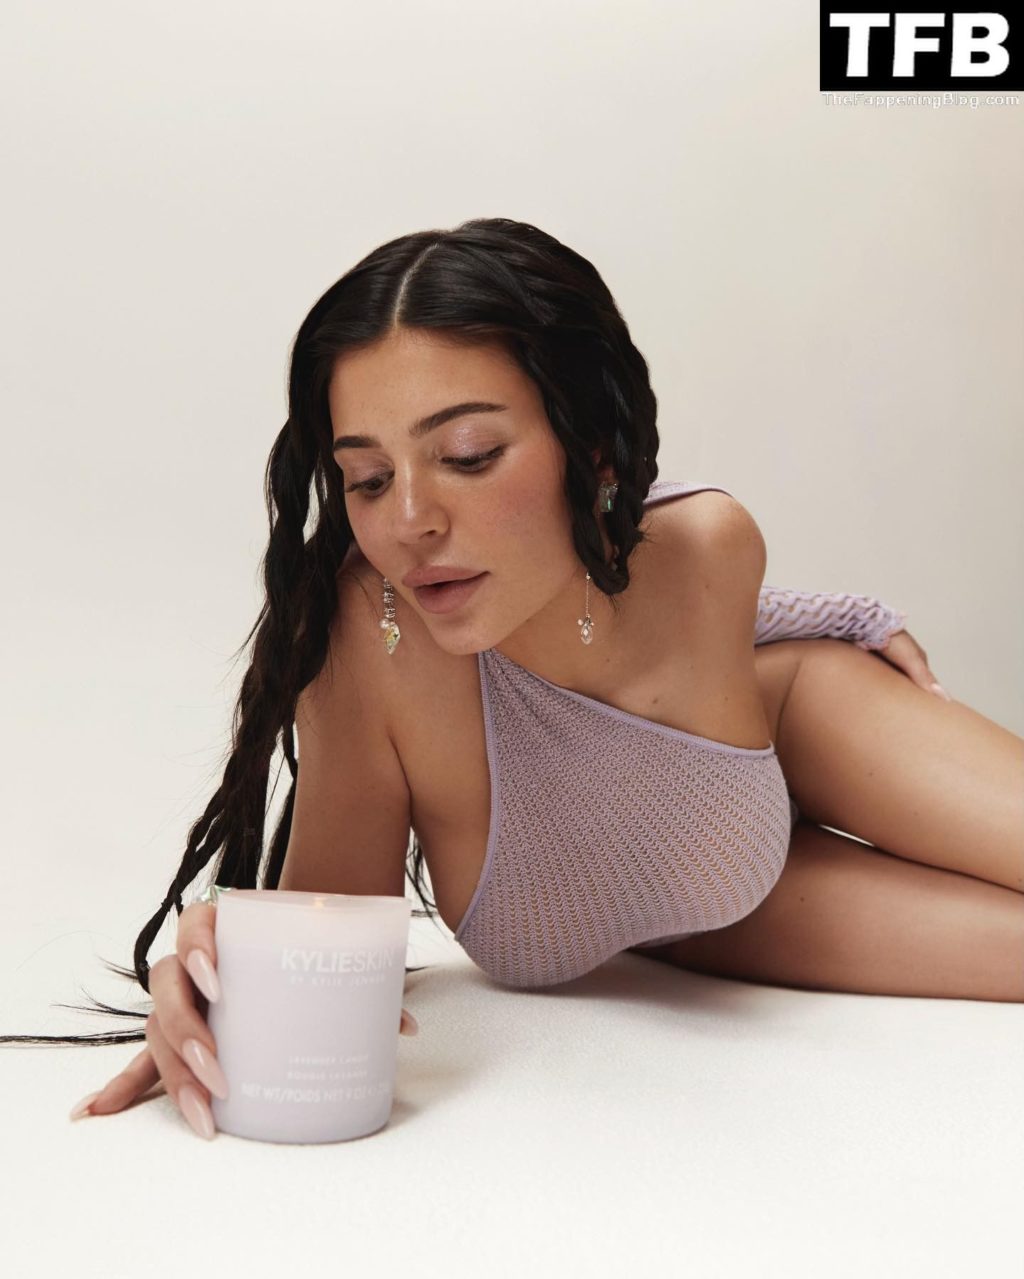 Kylie Jenner Gorgeous Curves 8 thefappeningblog.com  1024x1279 - Kylie Jenner Promotes Her Kylie Skin Collection in a Sexy Shoot (13 Photos)